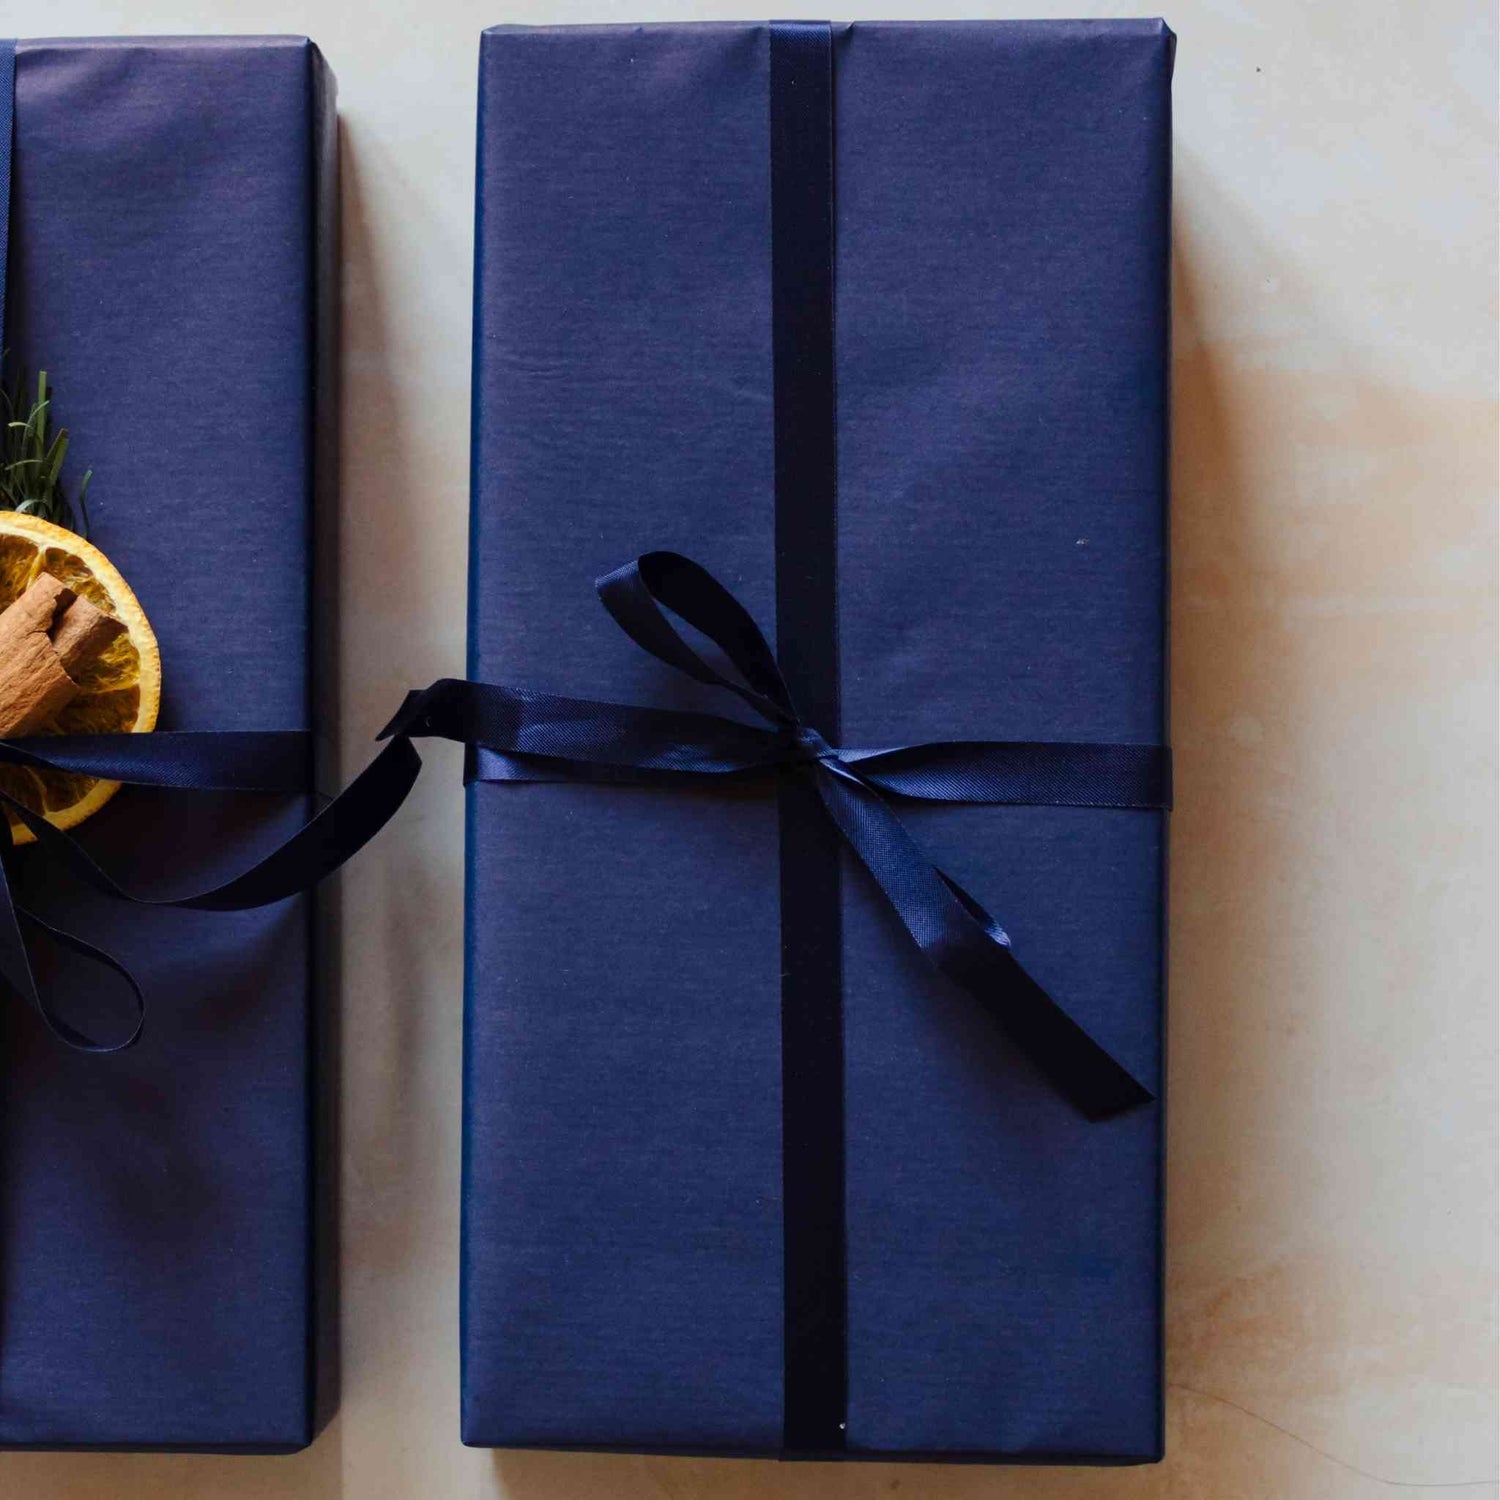 A coastal reed diffuser from the Home County Co. is shown with luxury Gift Wrap. The reed diffuser is wrapped in luxury navy wrapping paper secured with navy ribbon.